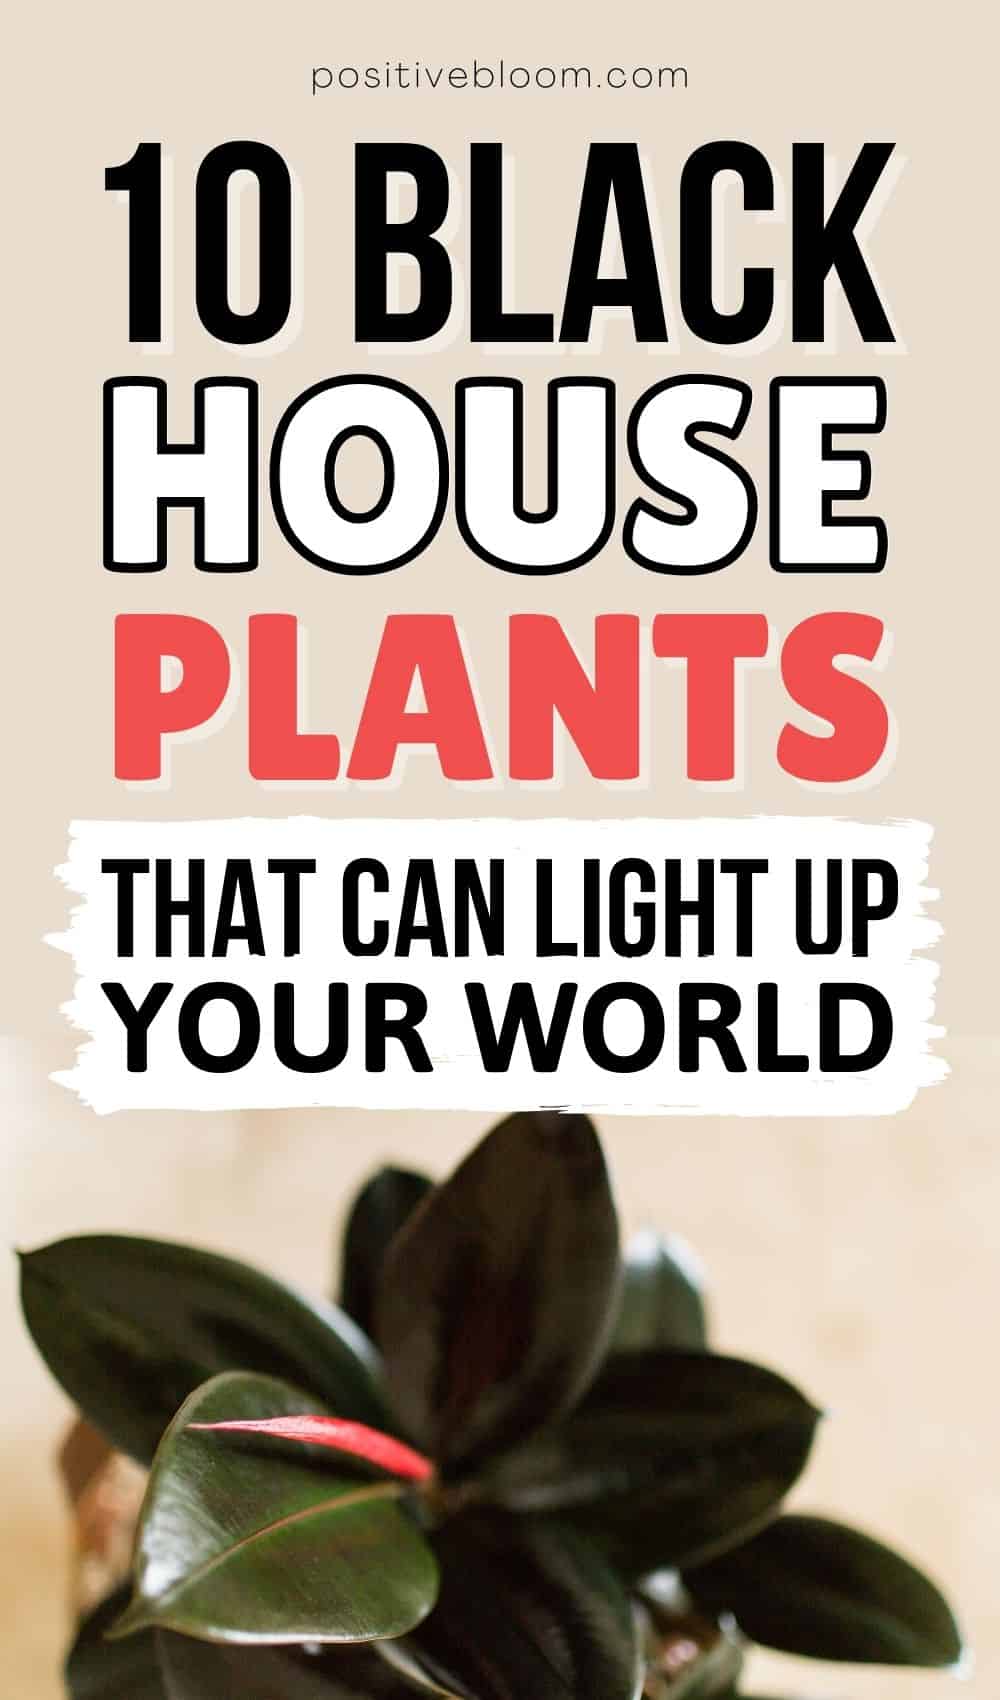 10 Black House Plants That Can Light Up Your World